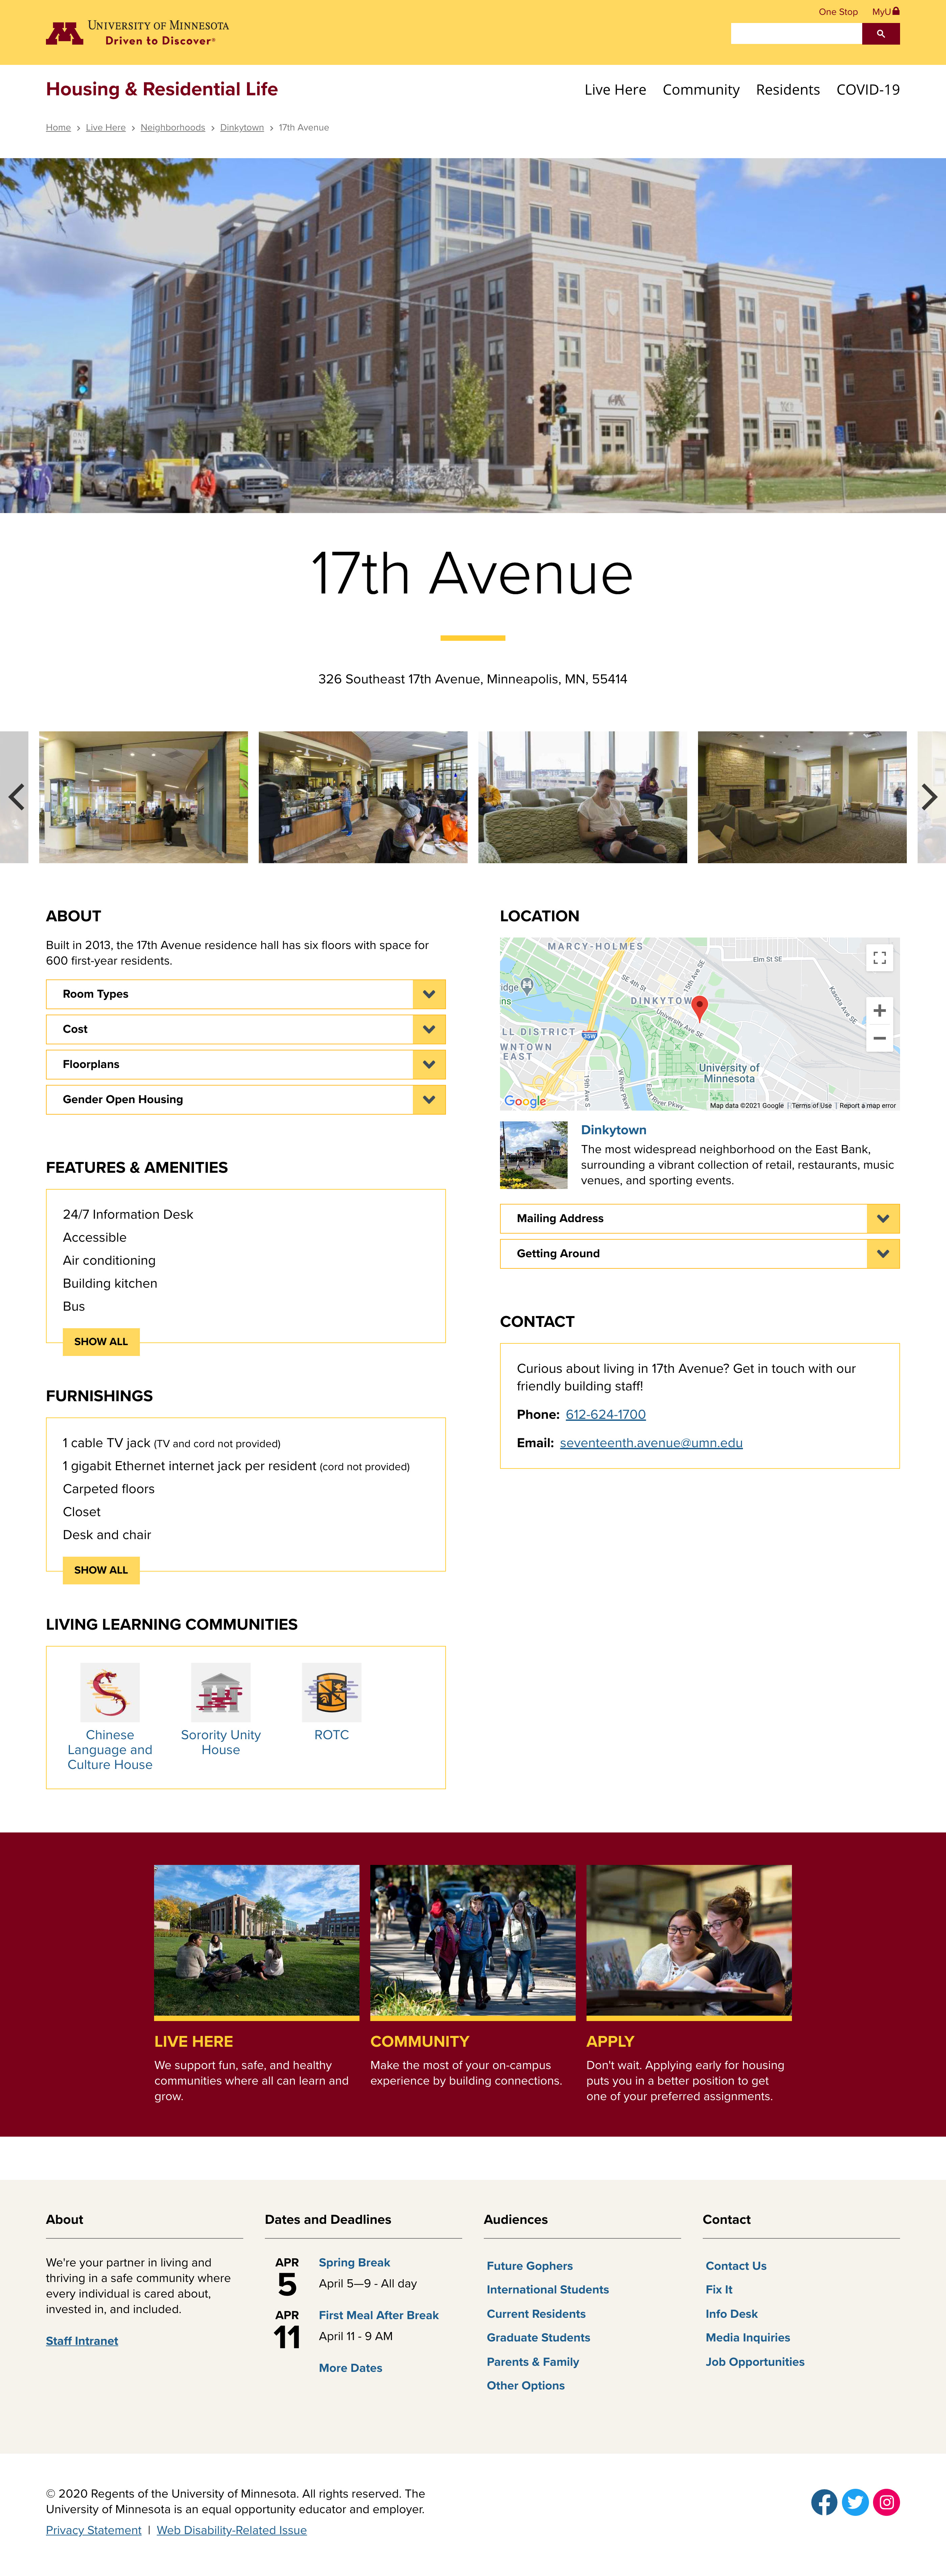 screenshot of an individual residential hall page